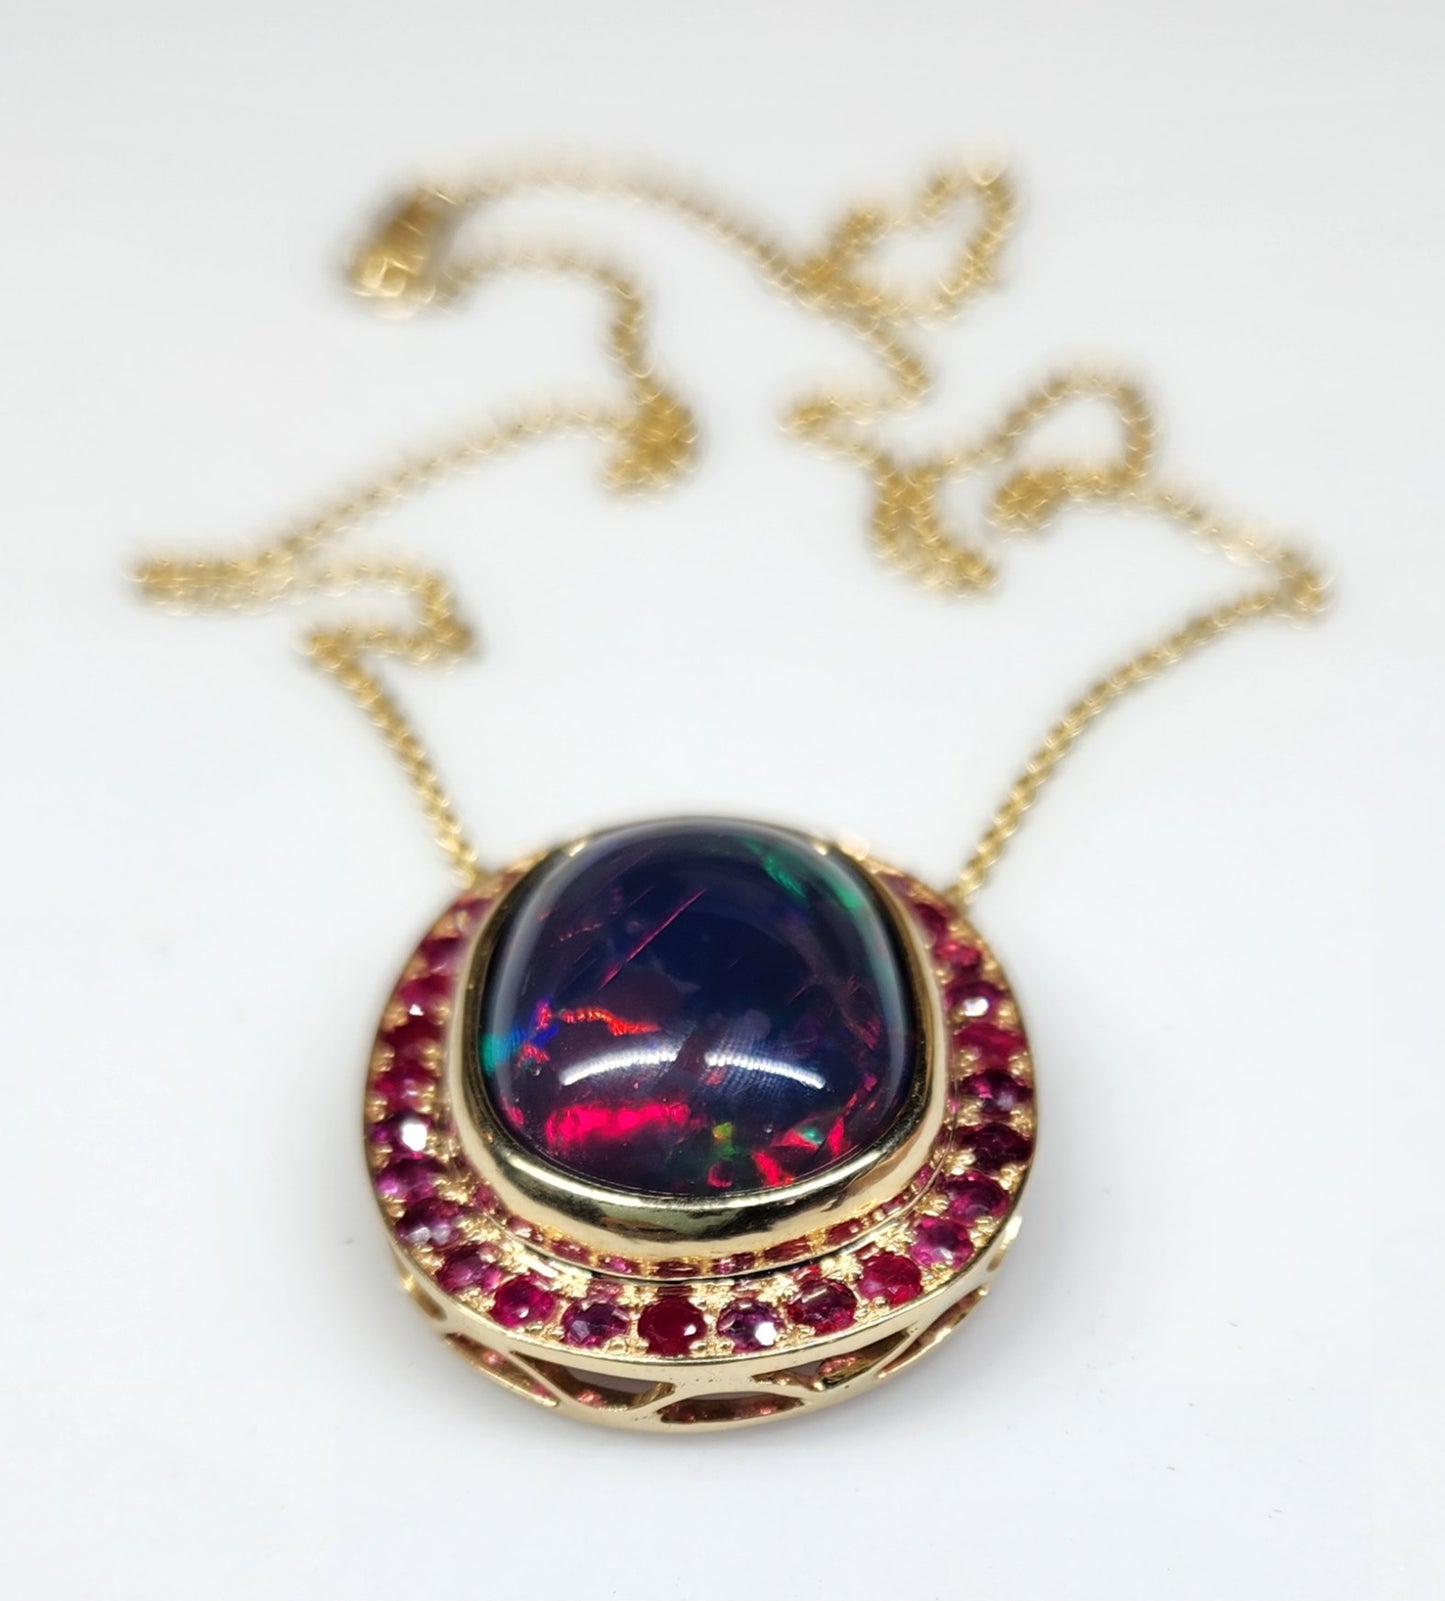 Black Opal & Ruby Pendant 14k Yellow Gold Necklace #368